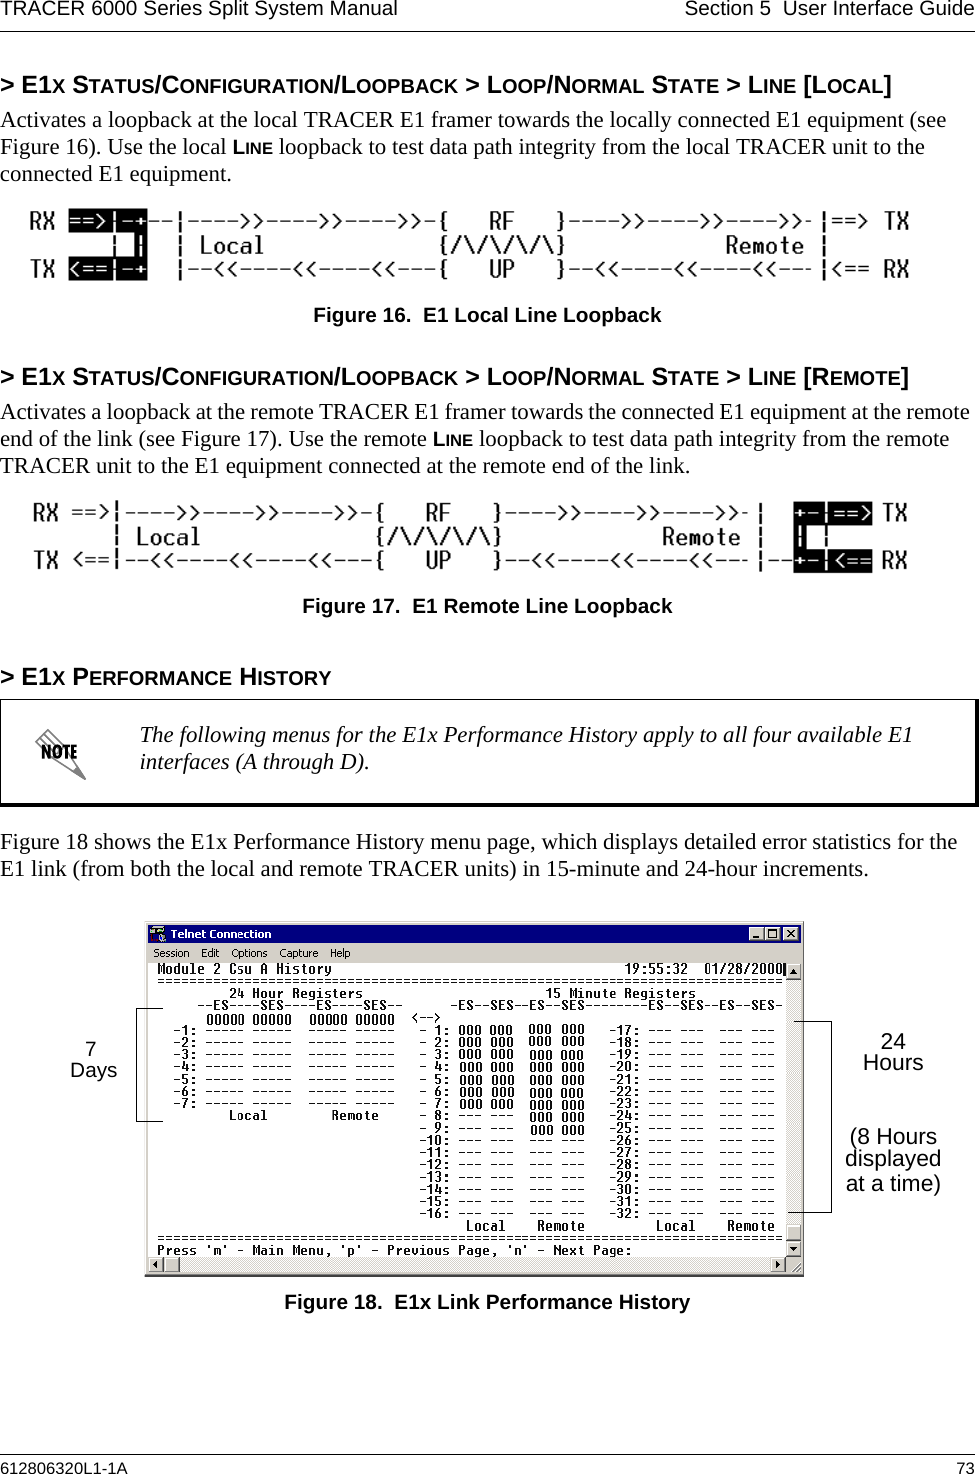 TRACER 6000 Series Split System Manual Section 5  User Interface Guide612806320L1-1A 73&gt; E1X STATUS/CONFIGURATION/LOOPBACK &gt; LOOP/NORMAL STATE &gt; LINE [LOCAL]Activates a loopback at the local TRACER E1 framer towards the locally connected E1 equipment (see Figure 16). Use the local LINE loopback to test data path integrity from the local TRACER unit to the connected E1 equipment.Figure 16.  E1 Local Line Loopback&gt; E1X STATUS/CONFIGURATION/LOOPBACK &gt; LOOP/NORMAL STATE &gt; LINE [REMOTE]Activates a loopback at the remote TRACER E1 framer towards the connected E1 equipment at the remote end of the link (see Figure 17). Use the remote LINE loopback to test data path integrity from the remote TRACER unit to the E1 equipment connected at the remote end of the link.Figure 17.  E1 Remote Line Loopback&gt; E1X PERFORMANCE HISTORYFigure 18 shows the E1x Performance History menu page, which displays detailed error statistics for the E1 link (from both the local and remote TRACER units) in 15-minute and 24-hour increments. Figure 18.  E1x Link Performance HistoryThe following menus for the E1x Performance History apply to all four available E1 interfaces (A through D).7 Days24Hours(8 Hoursdisplayedat a time)